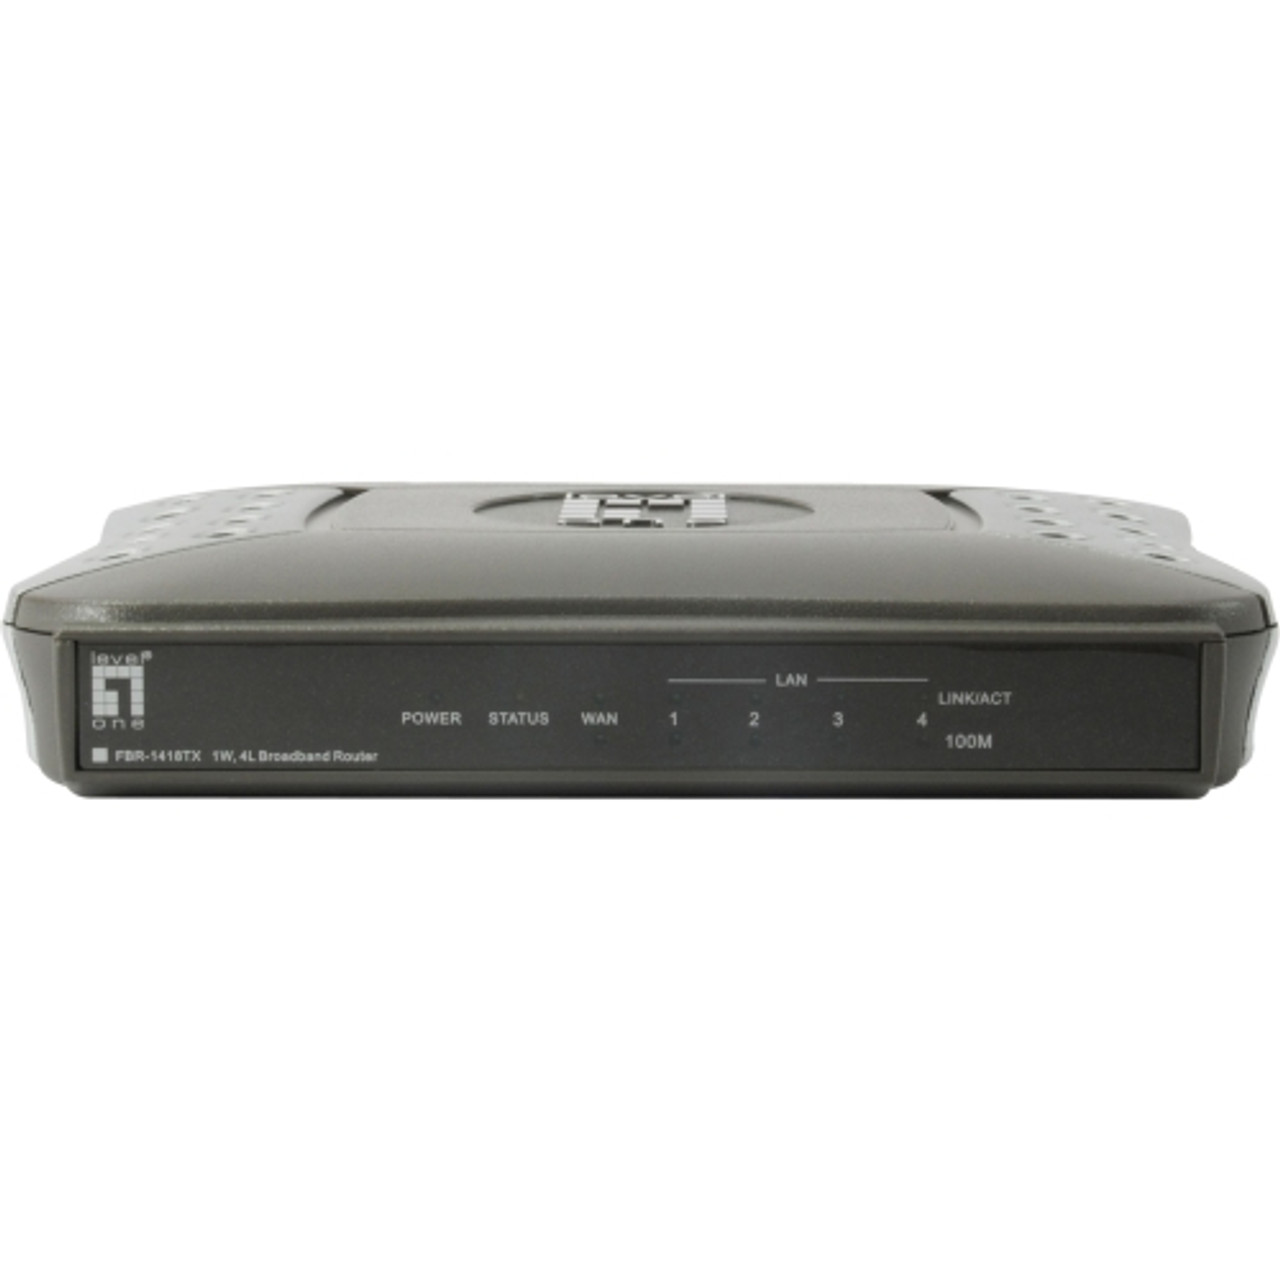 FRB1418TX LevelOne FBR-1418TX BroadBand Router w/ 4-Port Switch 5 Ports SlotsFast Ethernet Desktop, Wall Mountable (Refurbished)